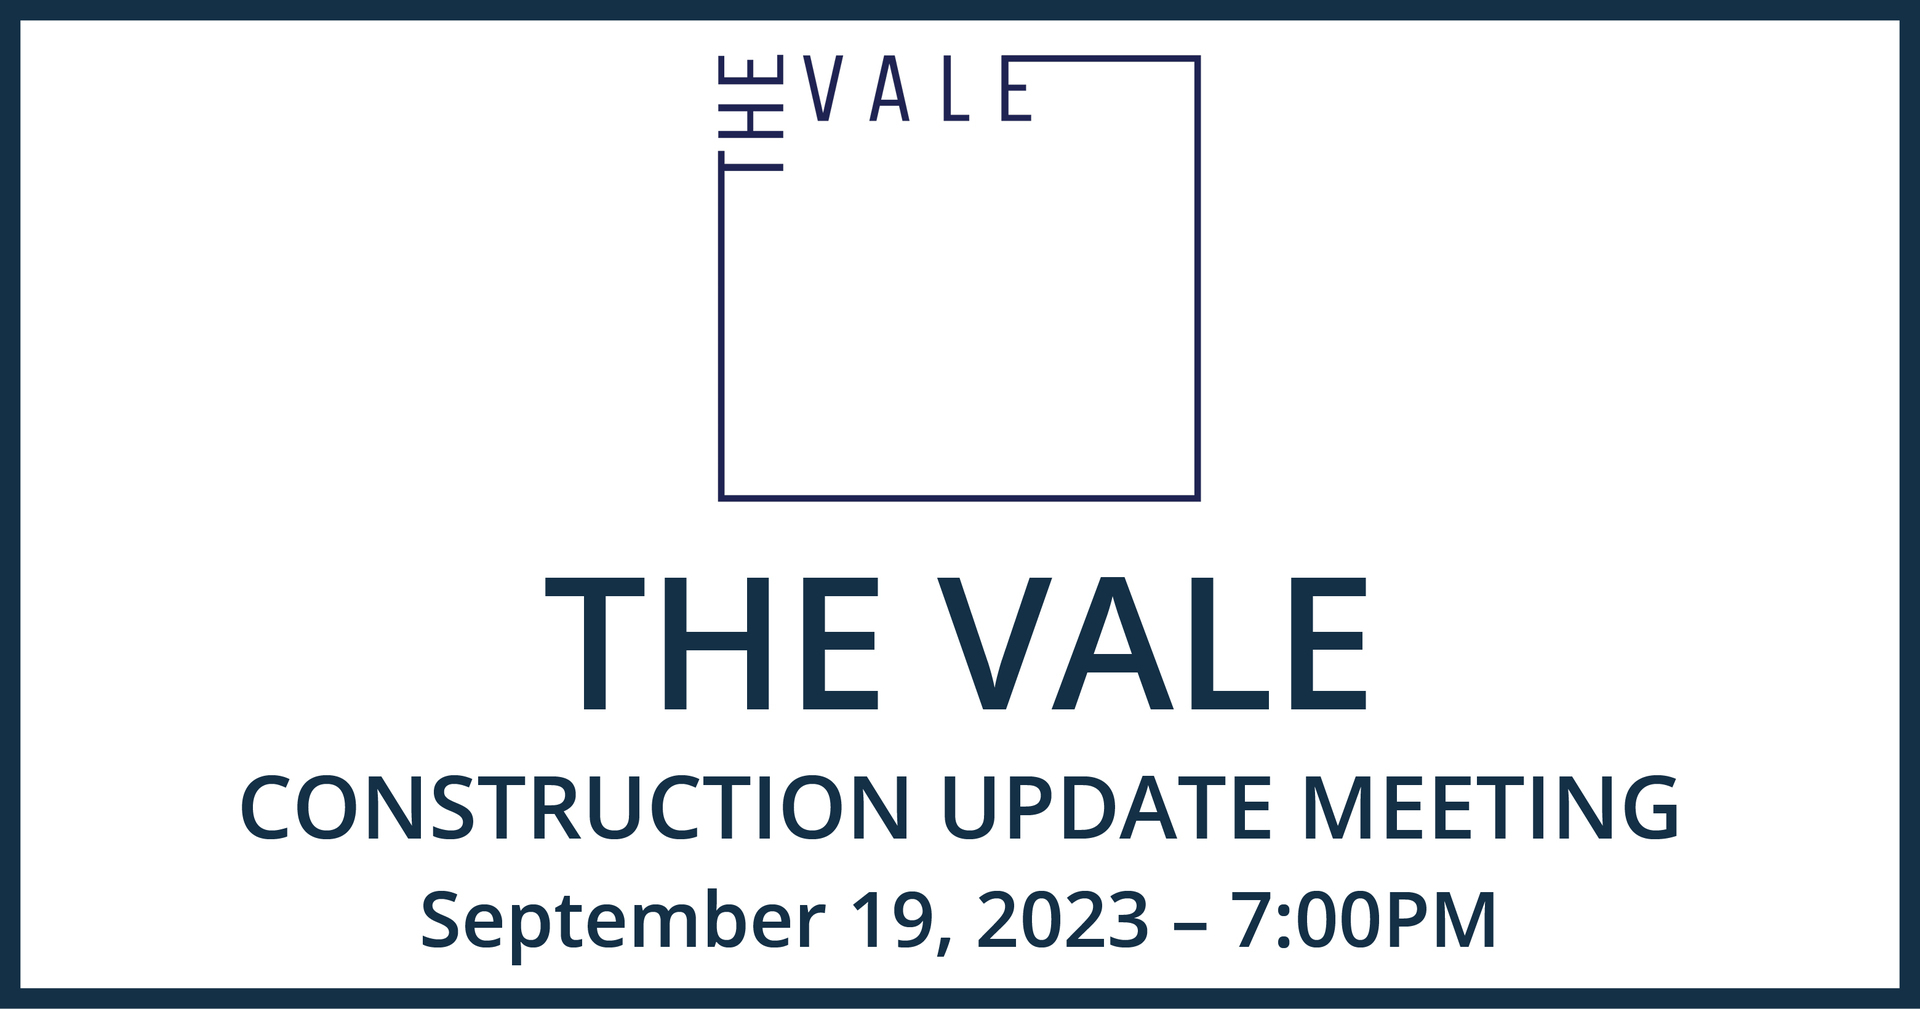 The Vale Construction Update Meeting, Online Event